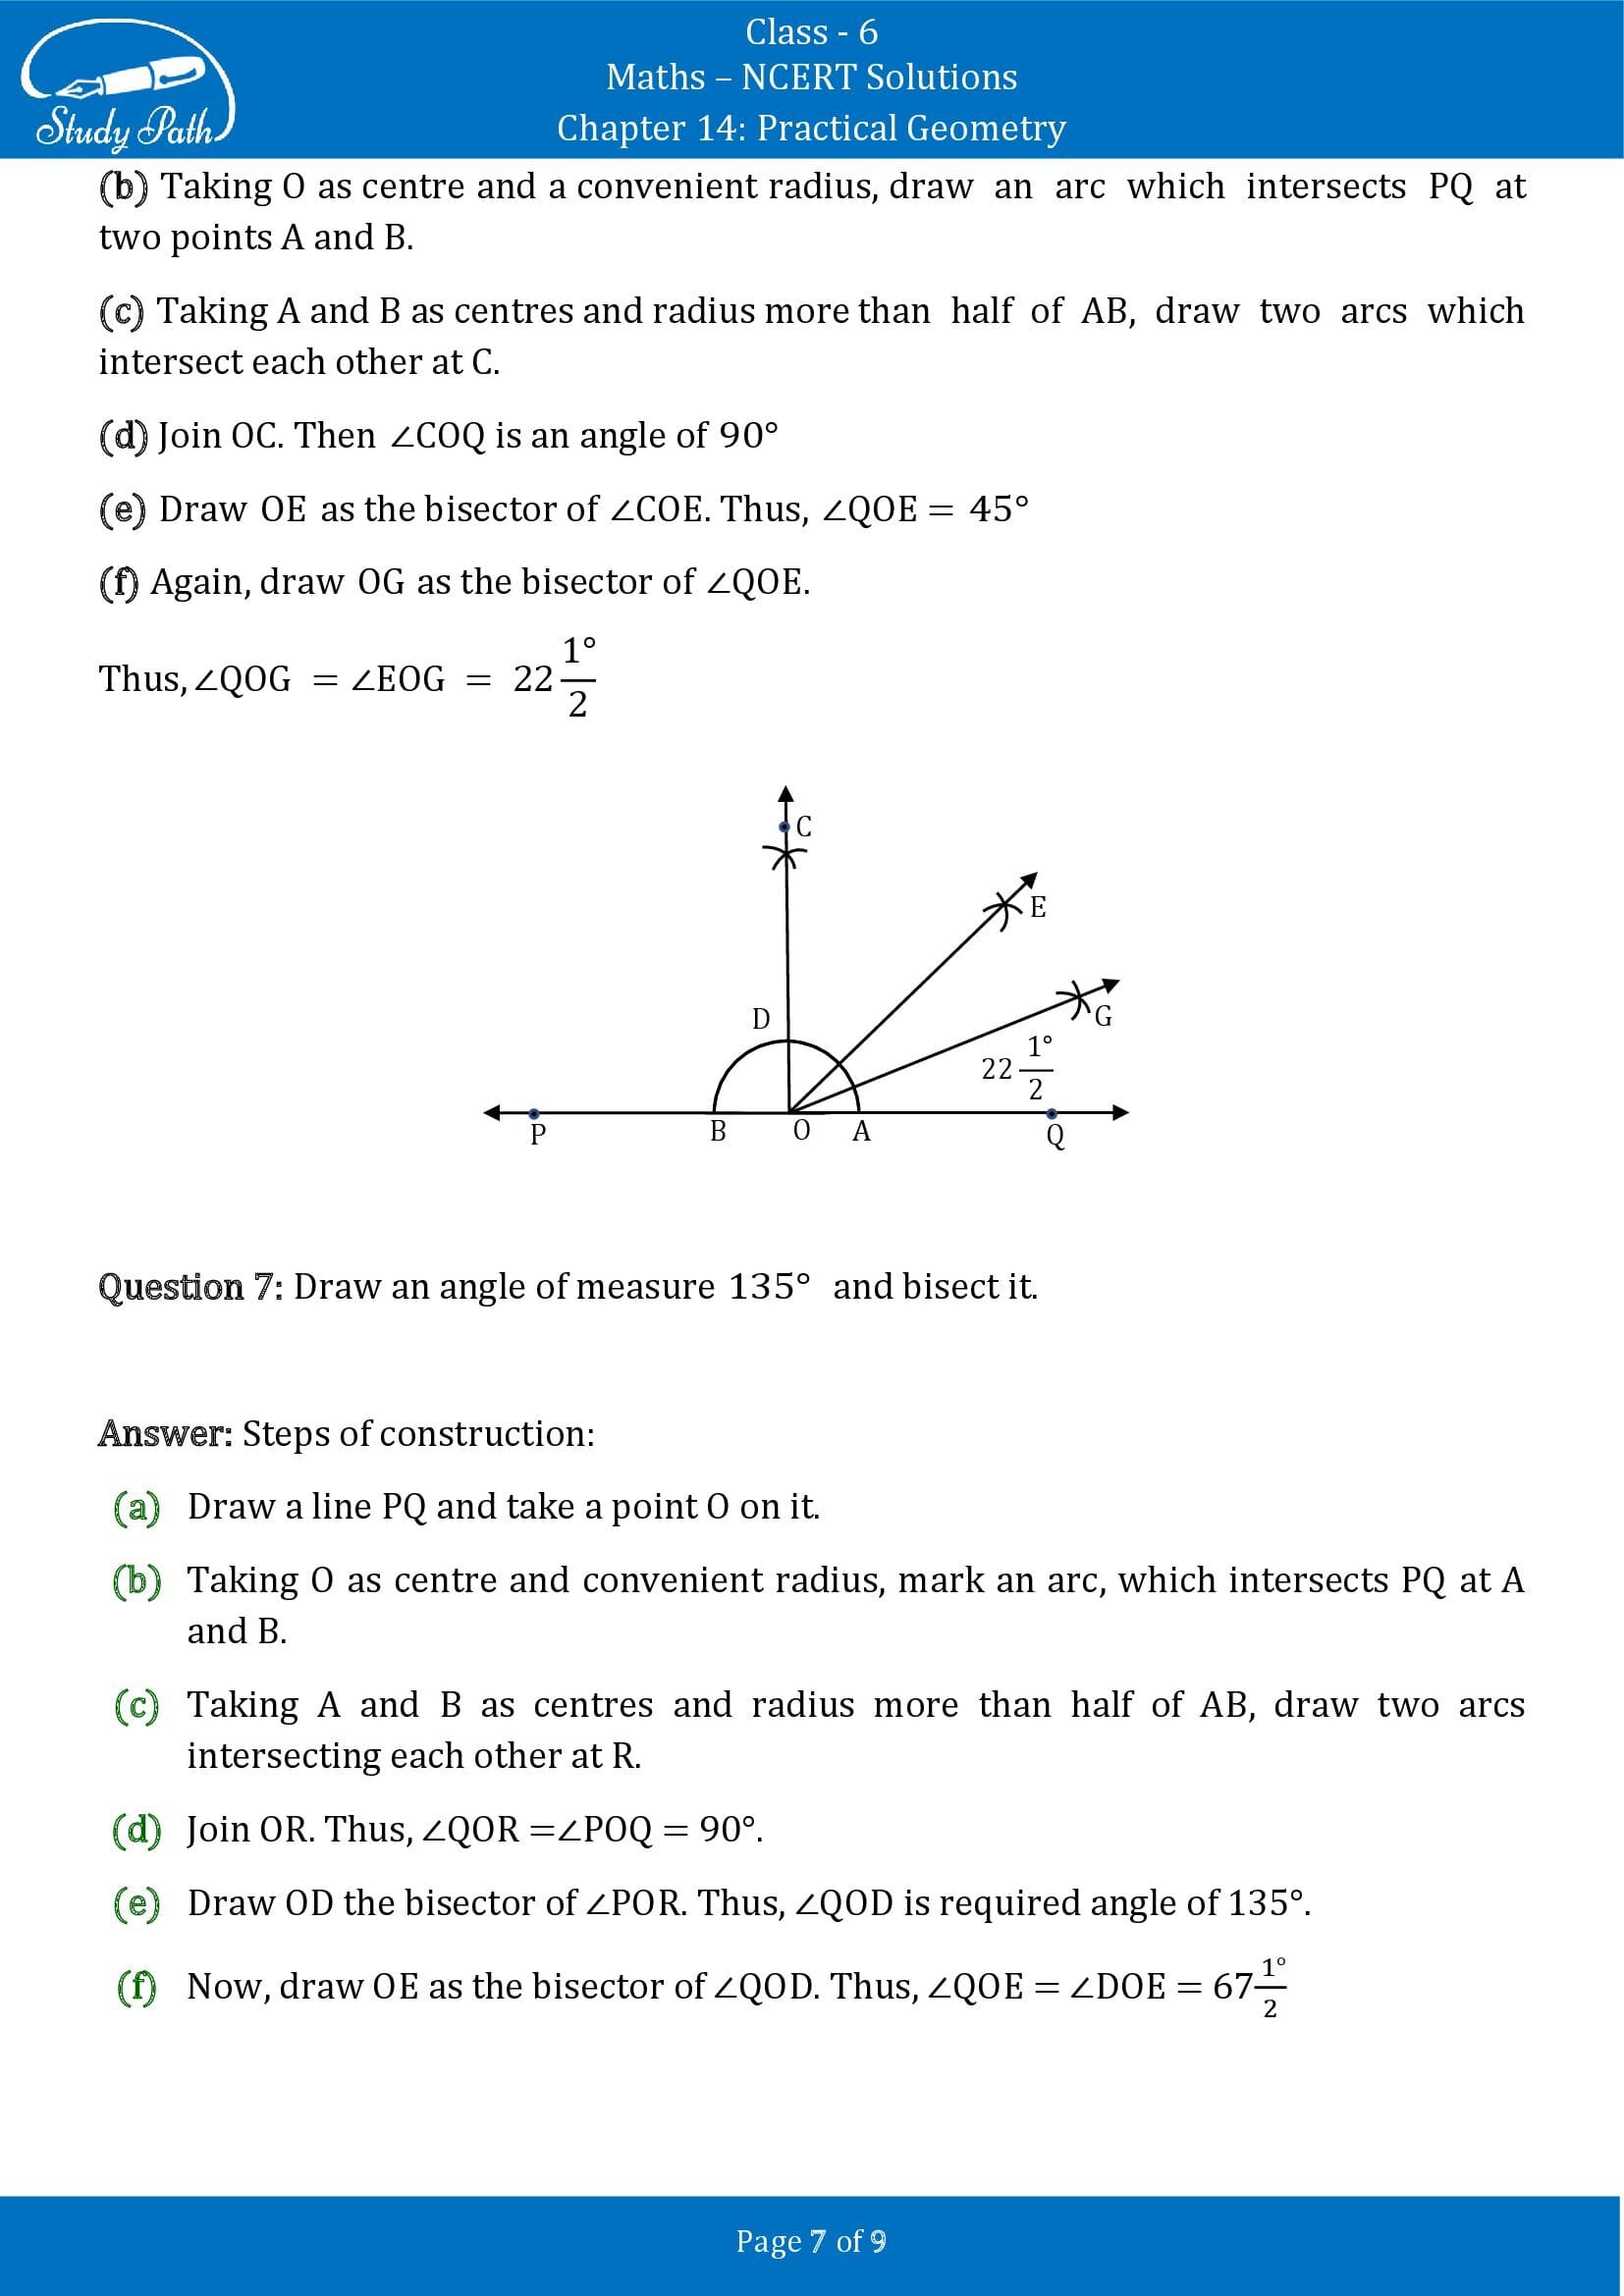 NCERT Solutions for Class 6 Maths Chapter 14 Practical Geometry Exercise 14.6 00007